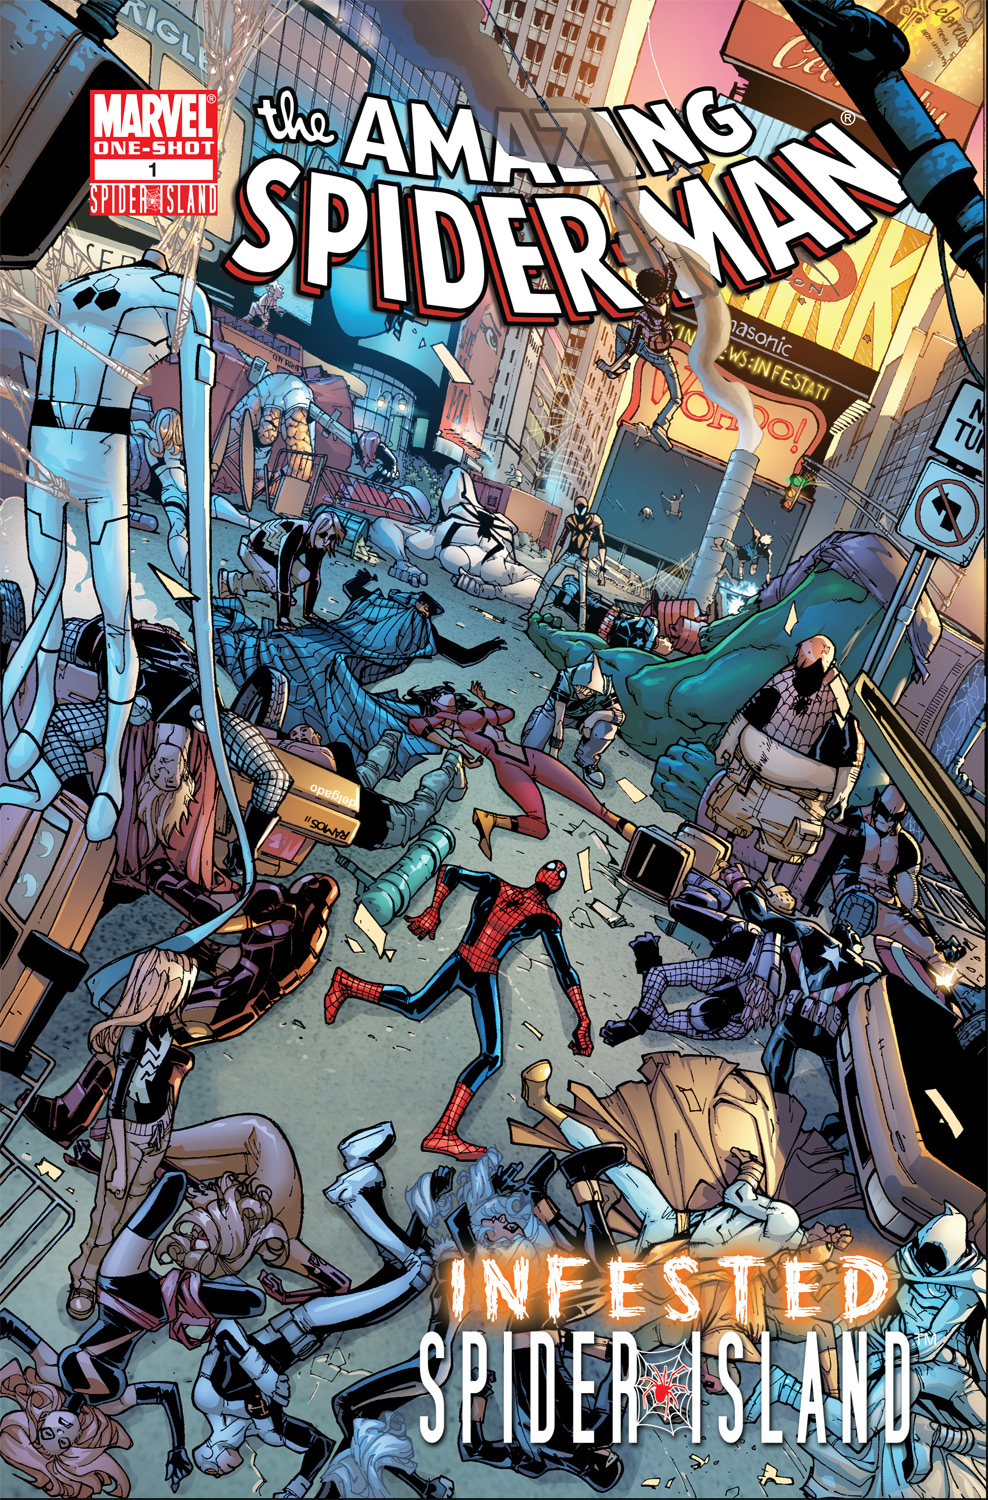 Amazing Spider-Man: Infested (2011) #1